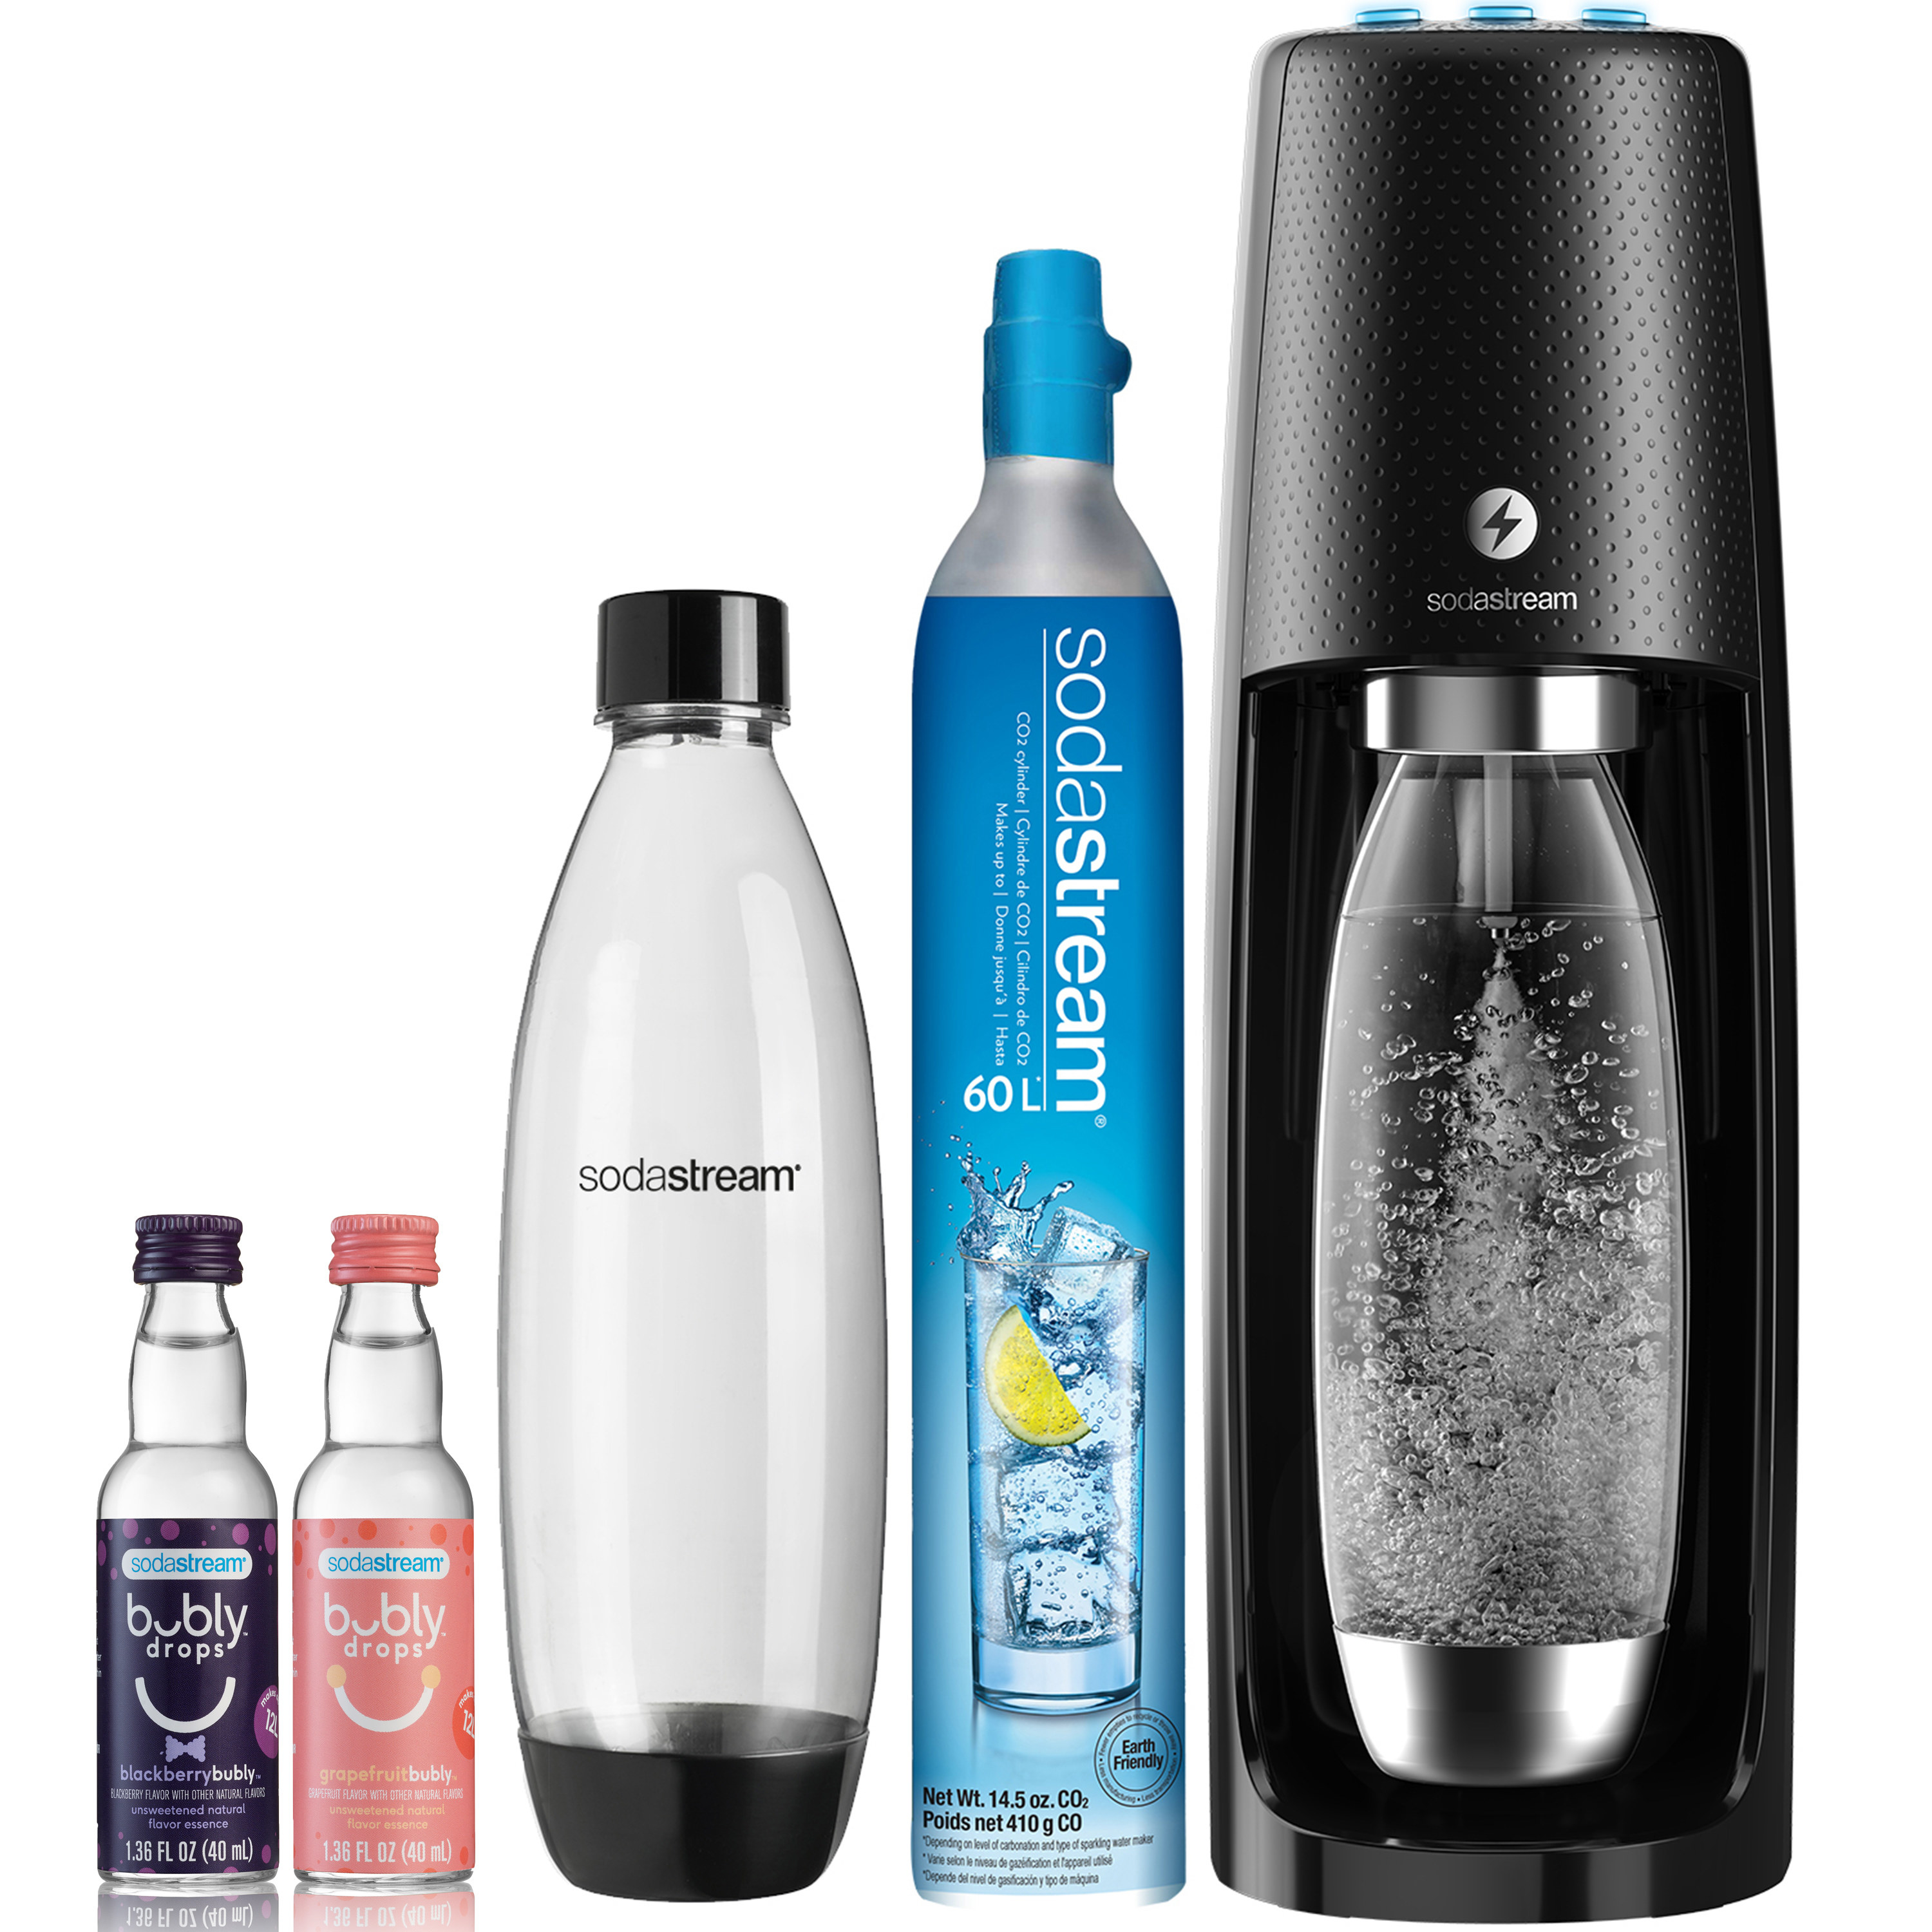 the flavor drops, carbonation bottle, canister, and SodaStream